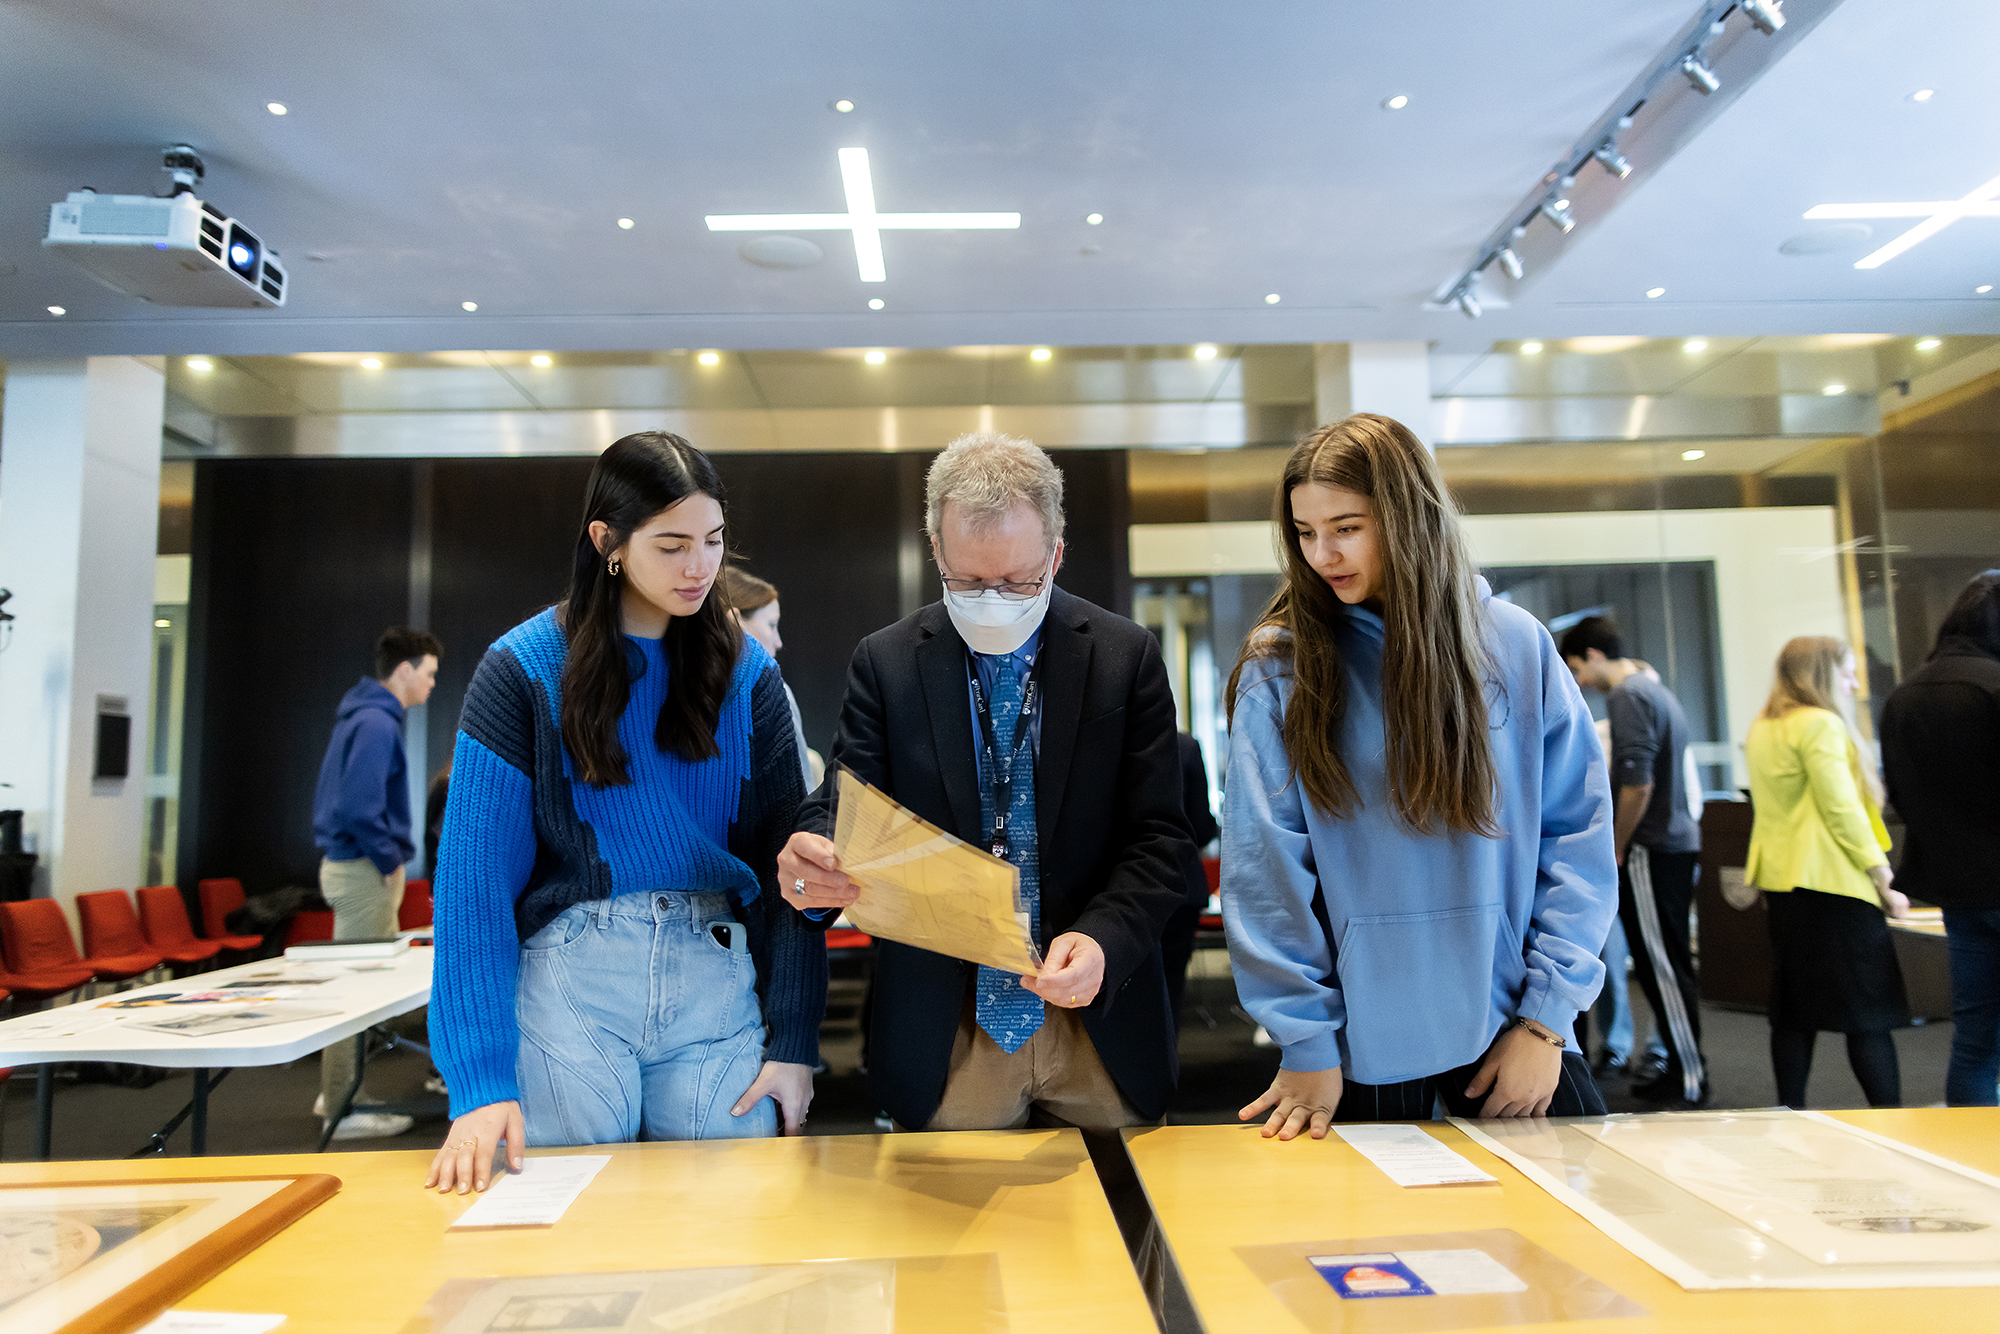 three people looking at a sheet of paper while standing at a table filled with printed materials